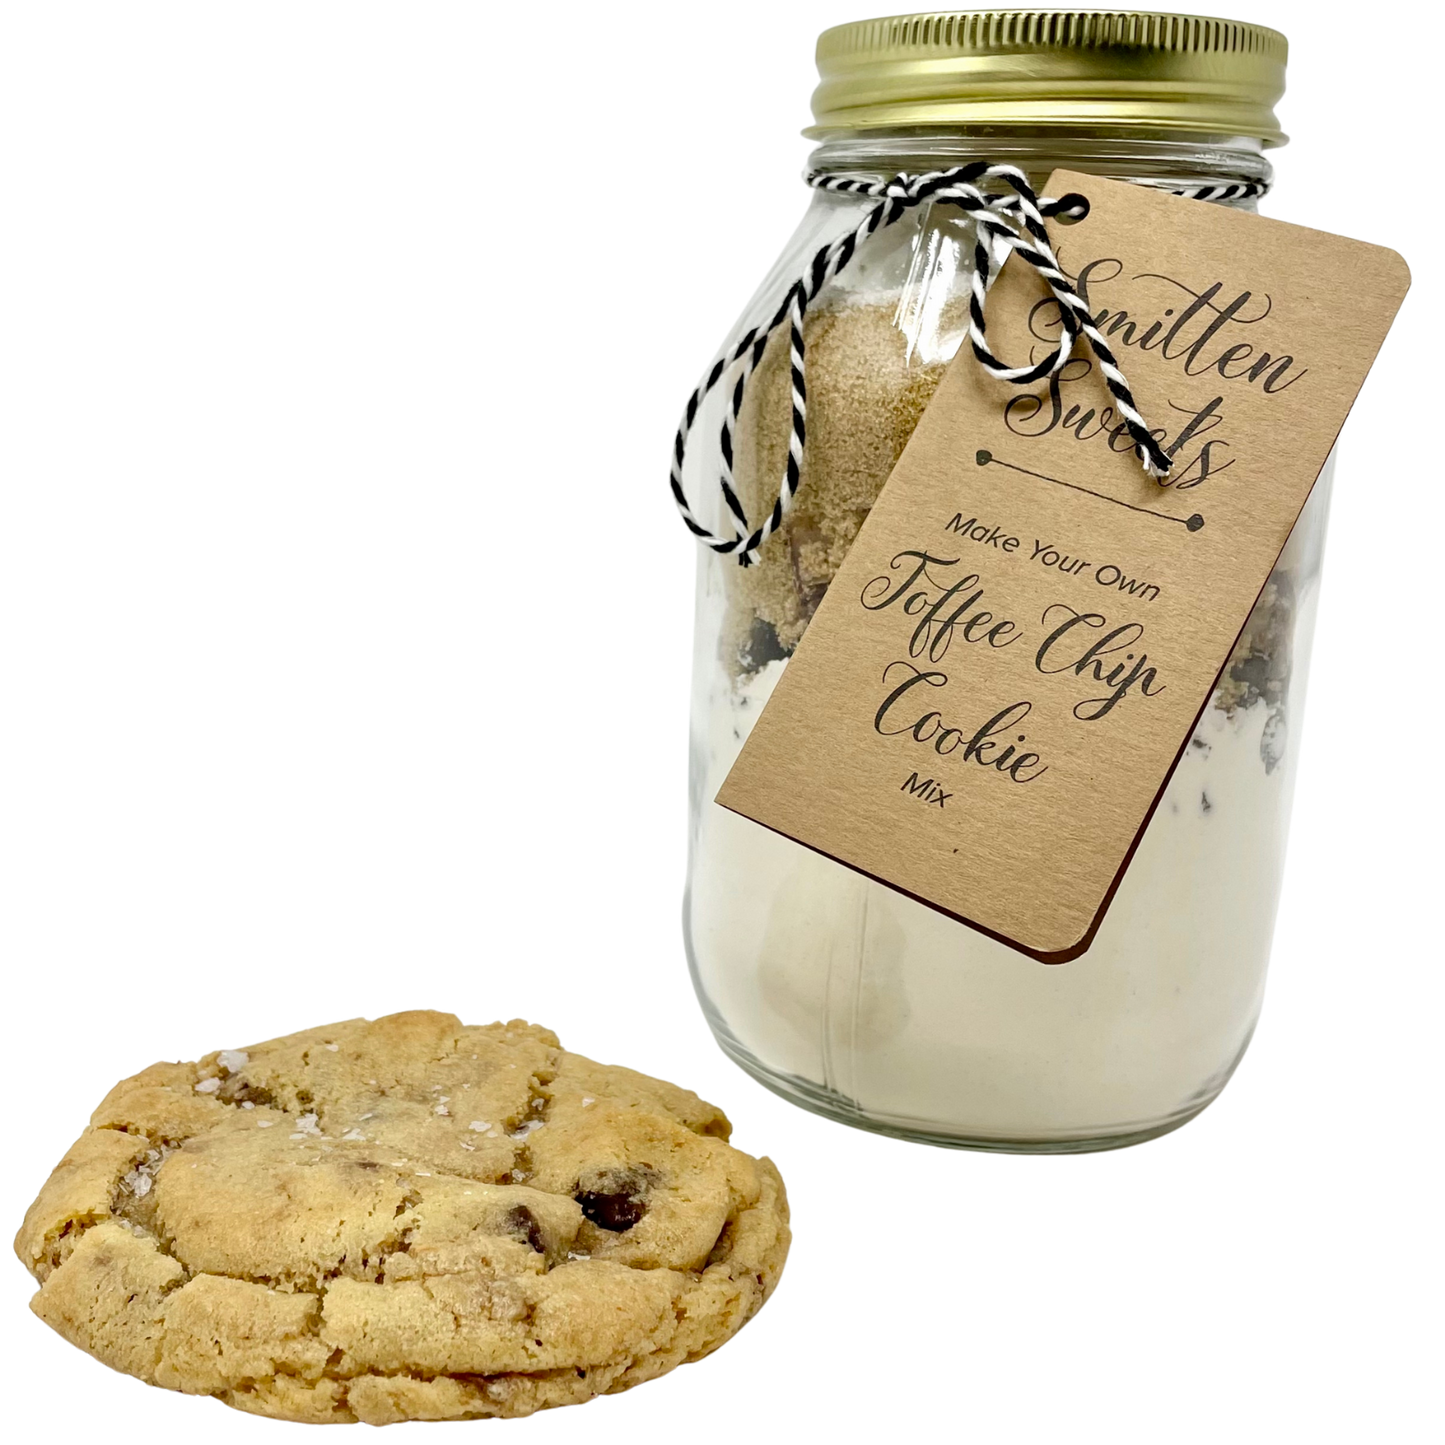 Toffee Chip Cookie Mix